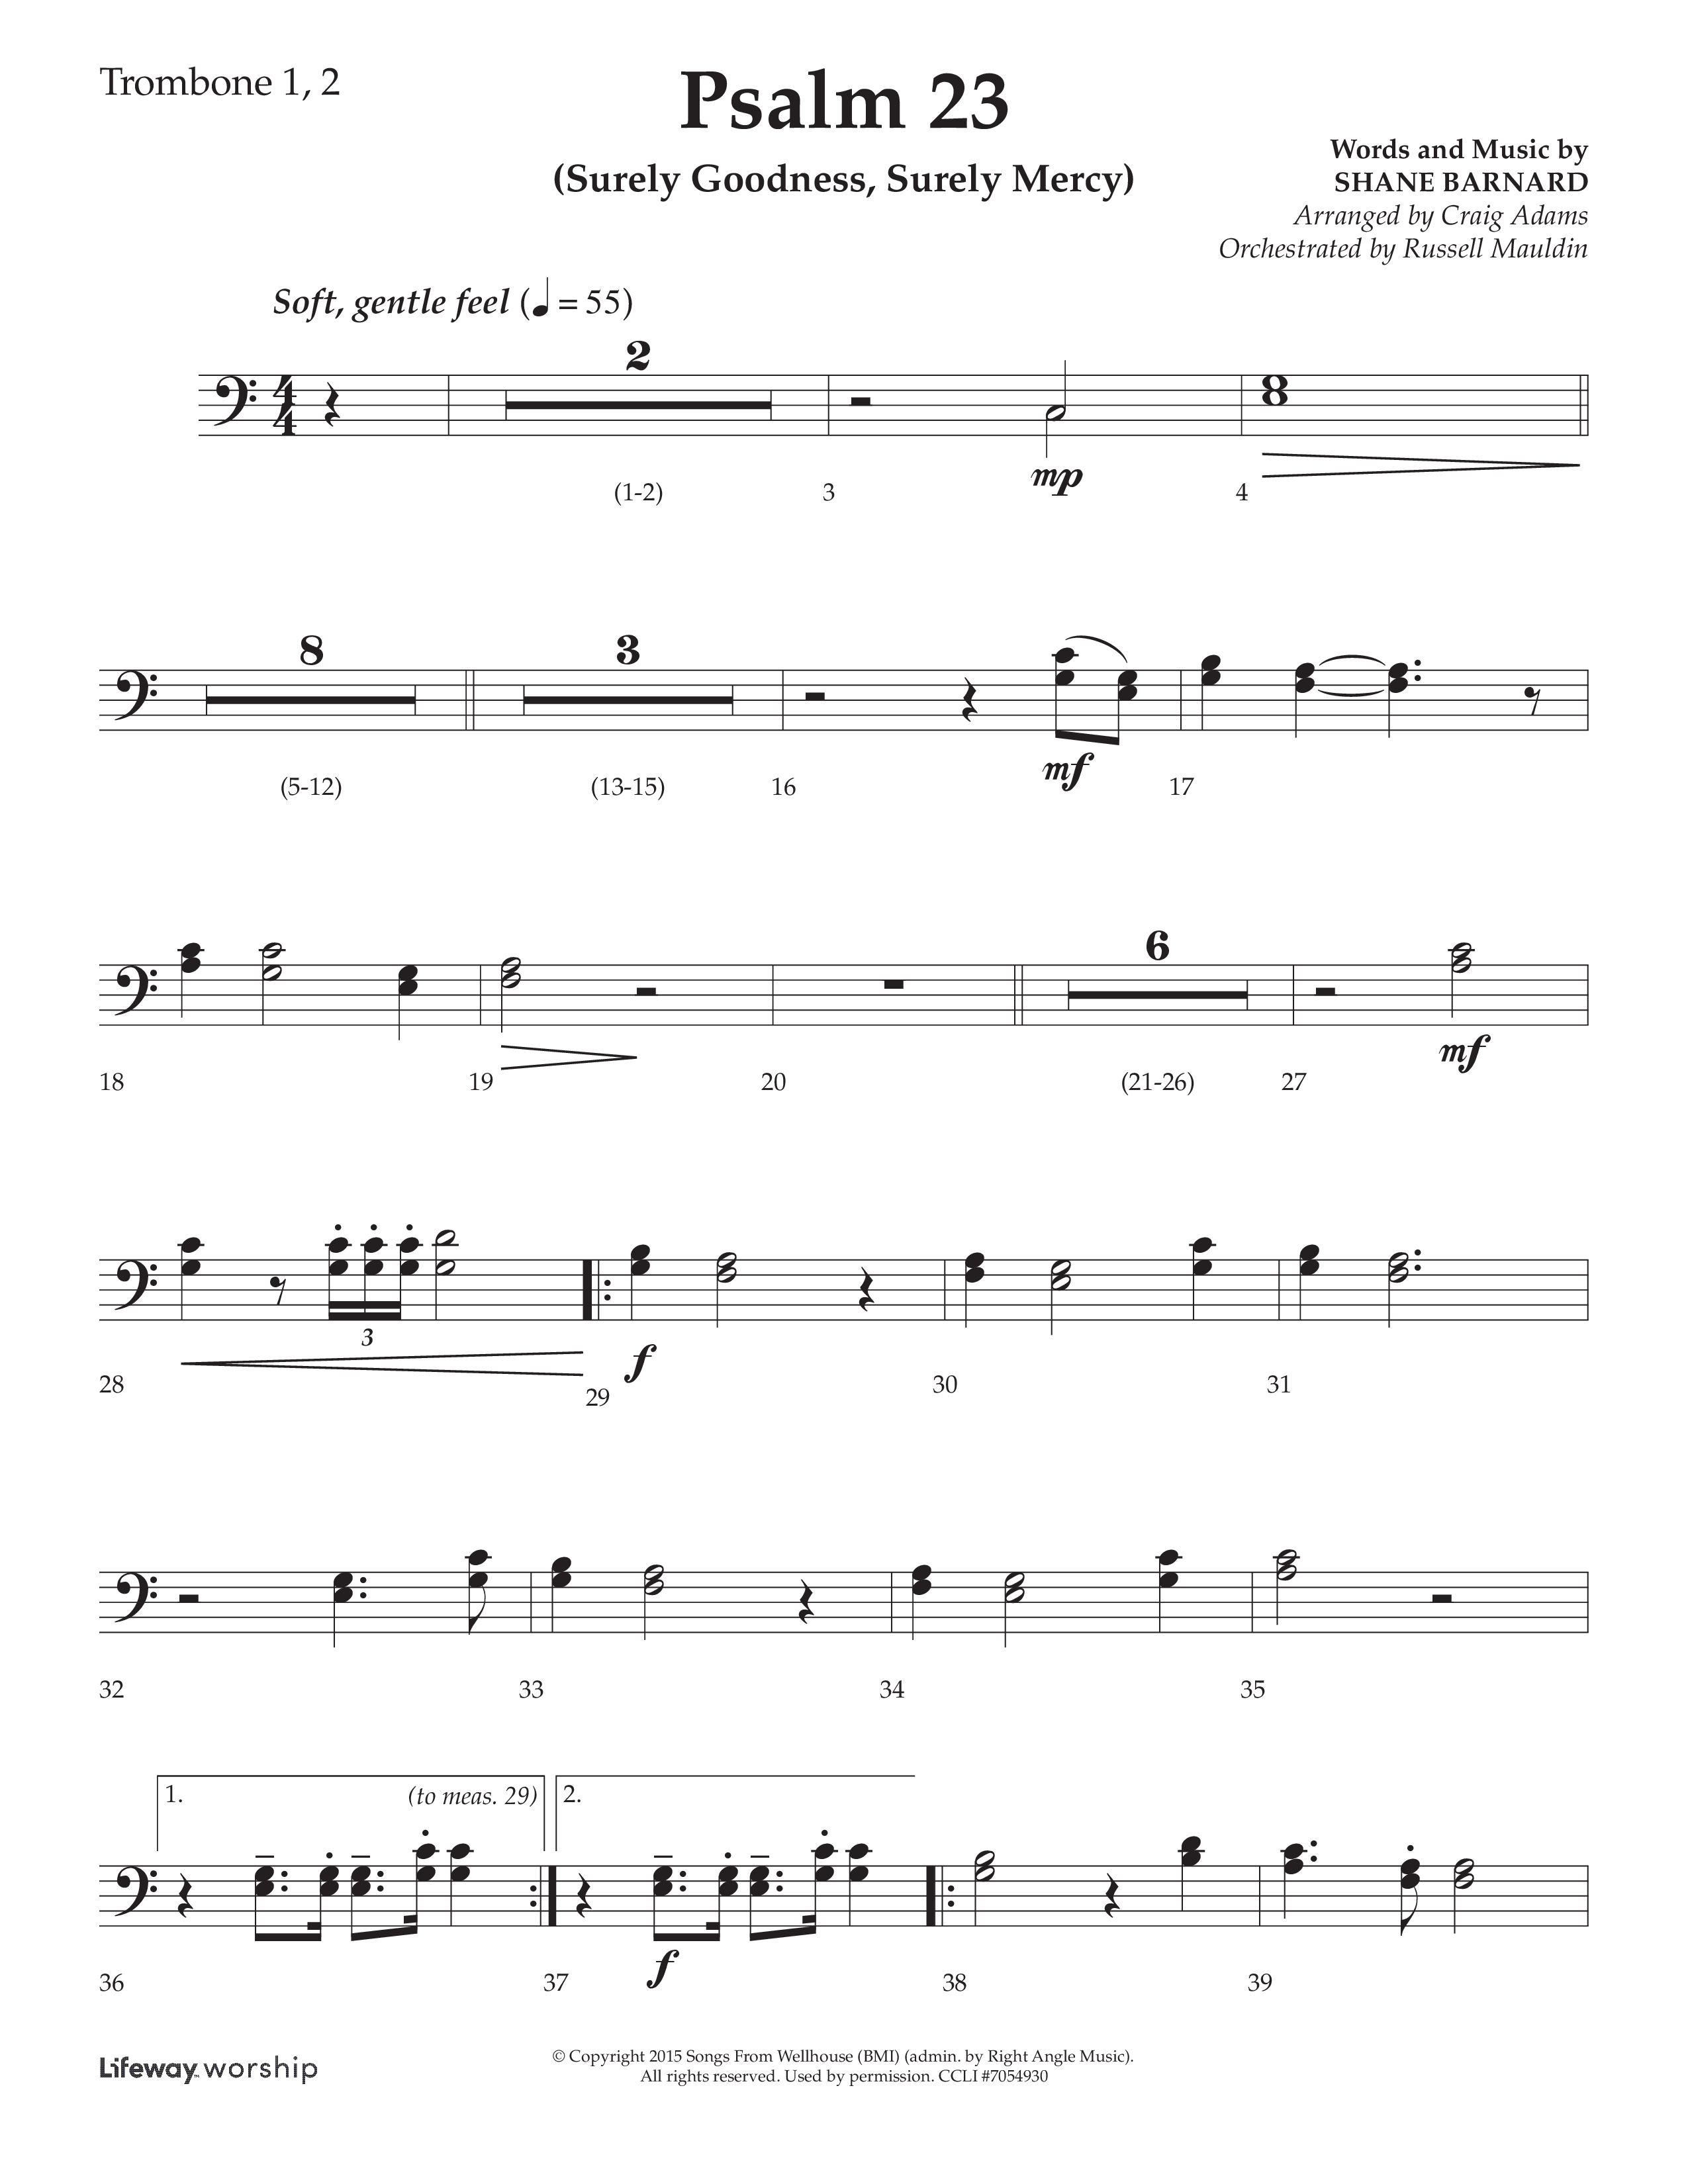 Psalm 23 (Surely Goodness) (Choral Anthem SATB) Trombone 1/2 (Lifeway Choral / Arr. Craig Adams / Orch. Russell Mauldin)